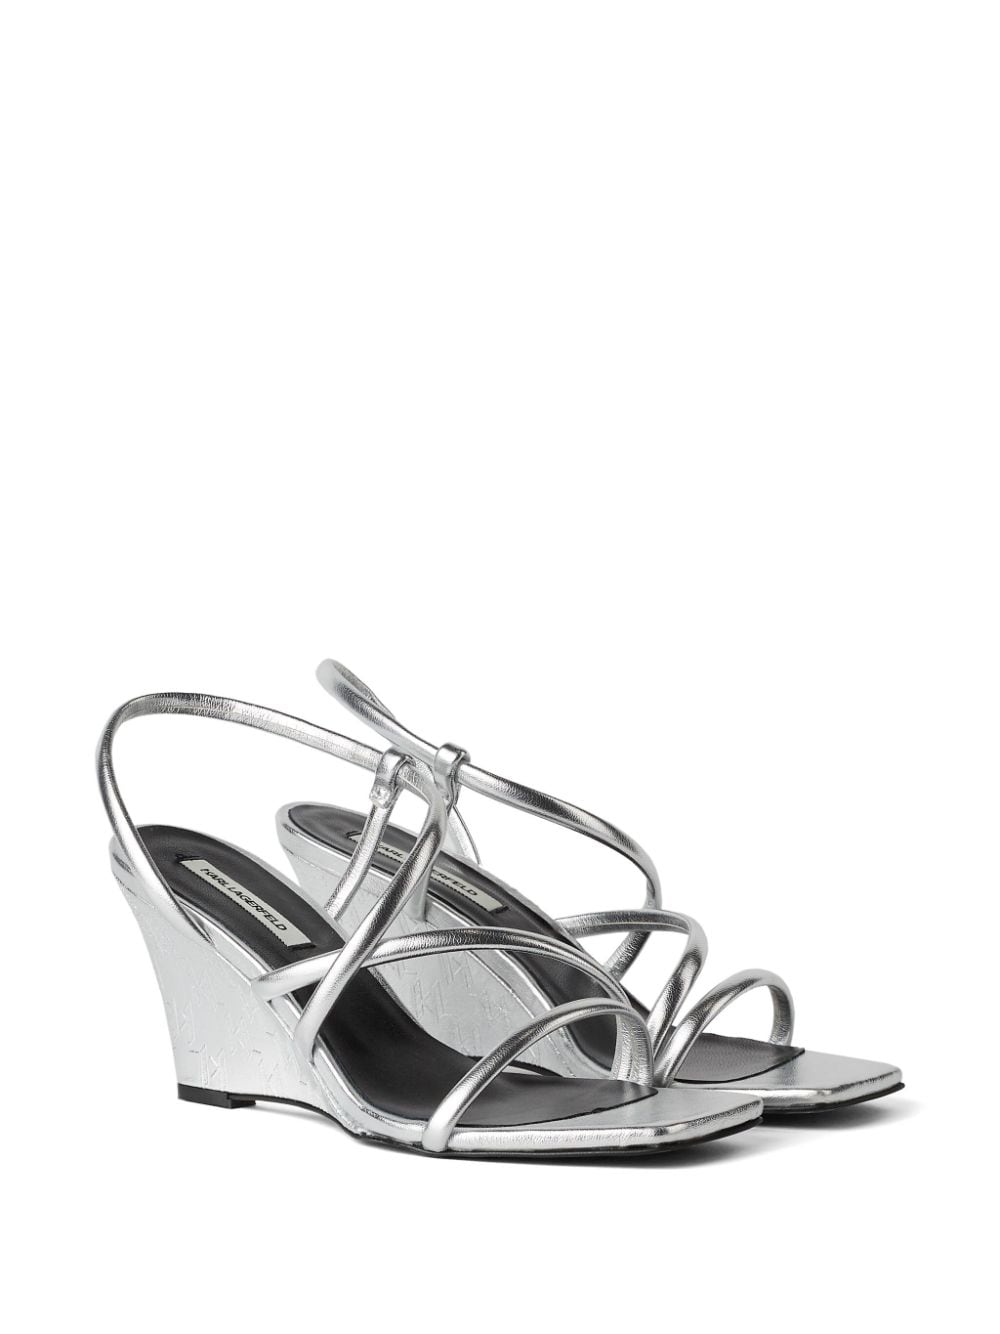 Karl Lagerfeld Rialto 80mm leather sandals - Zilver